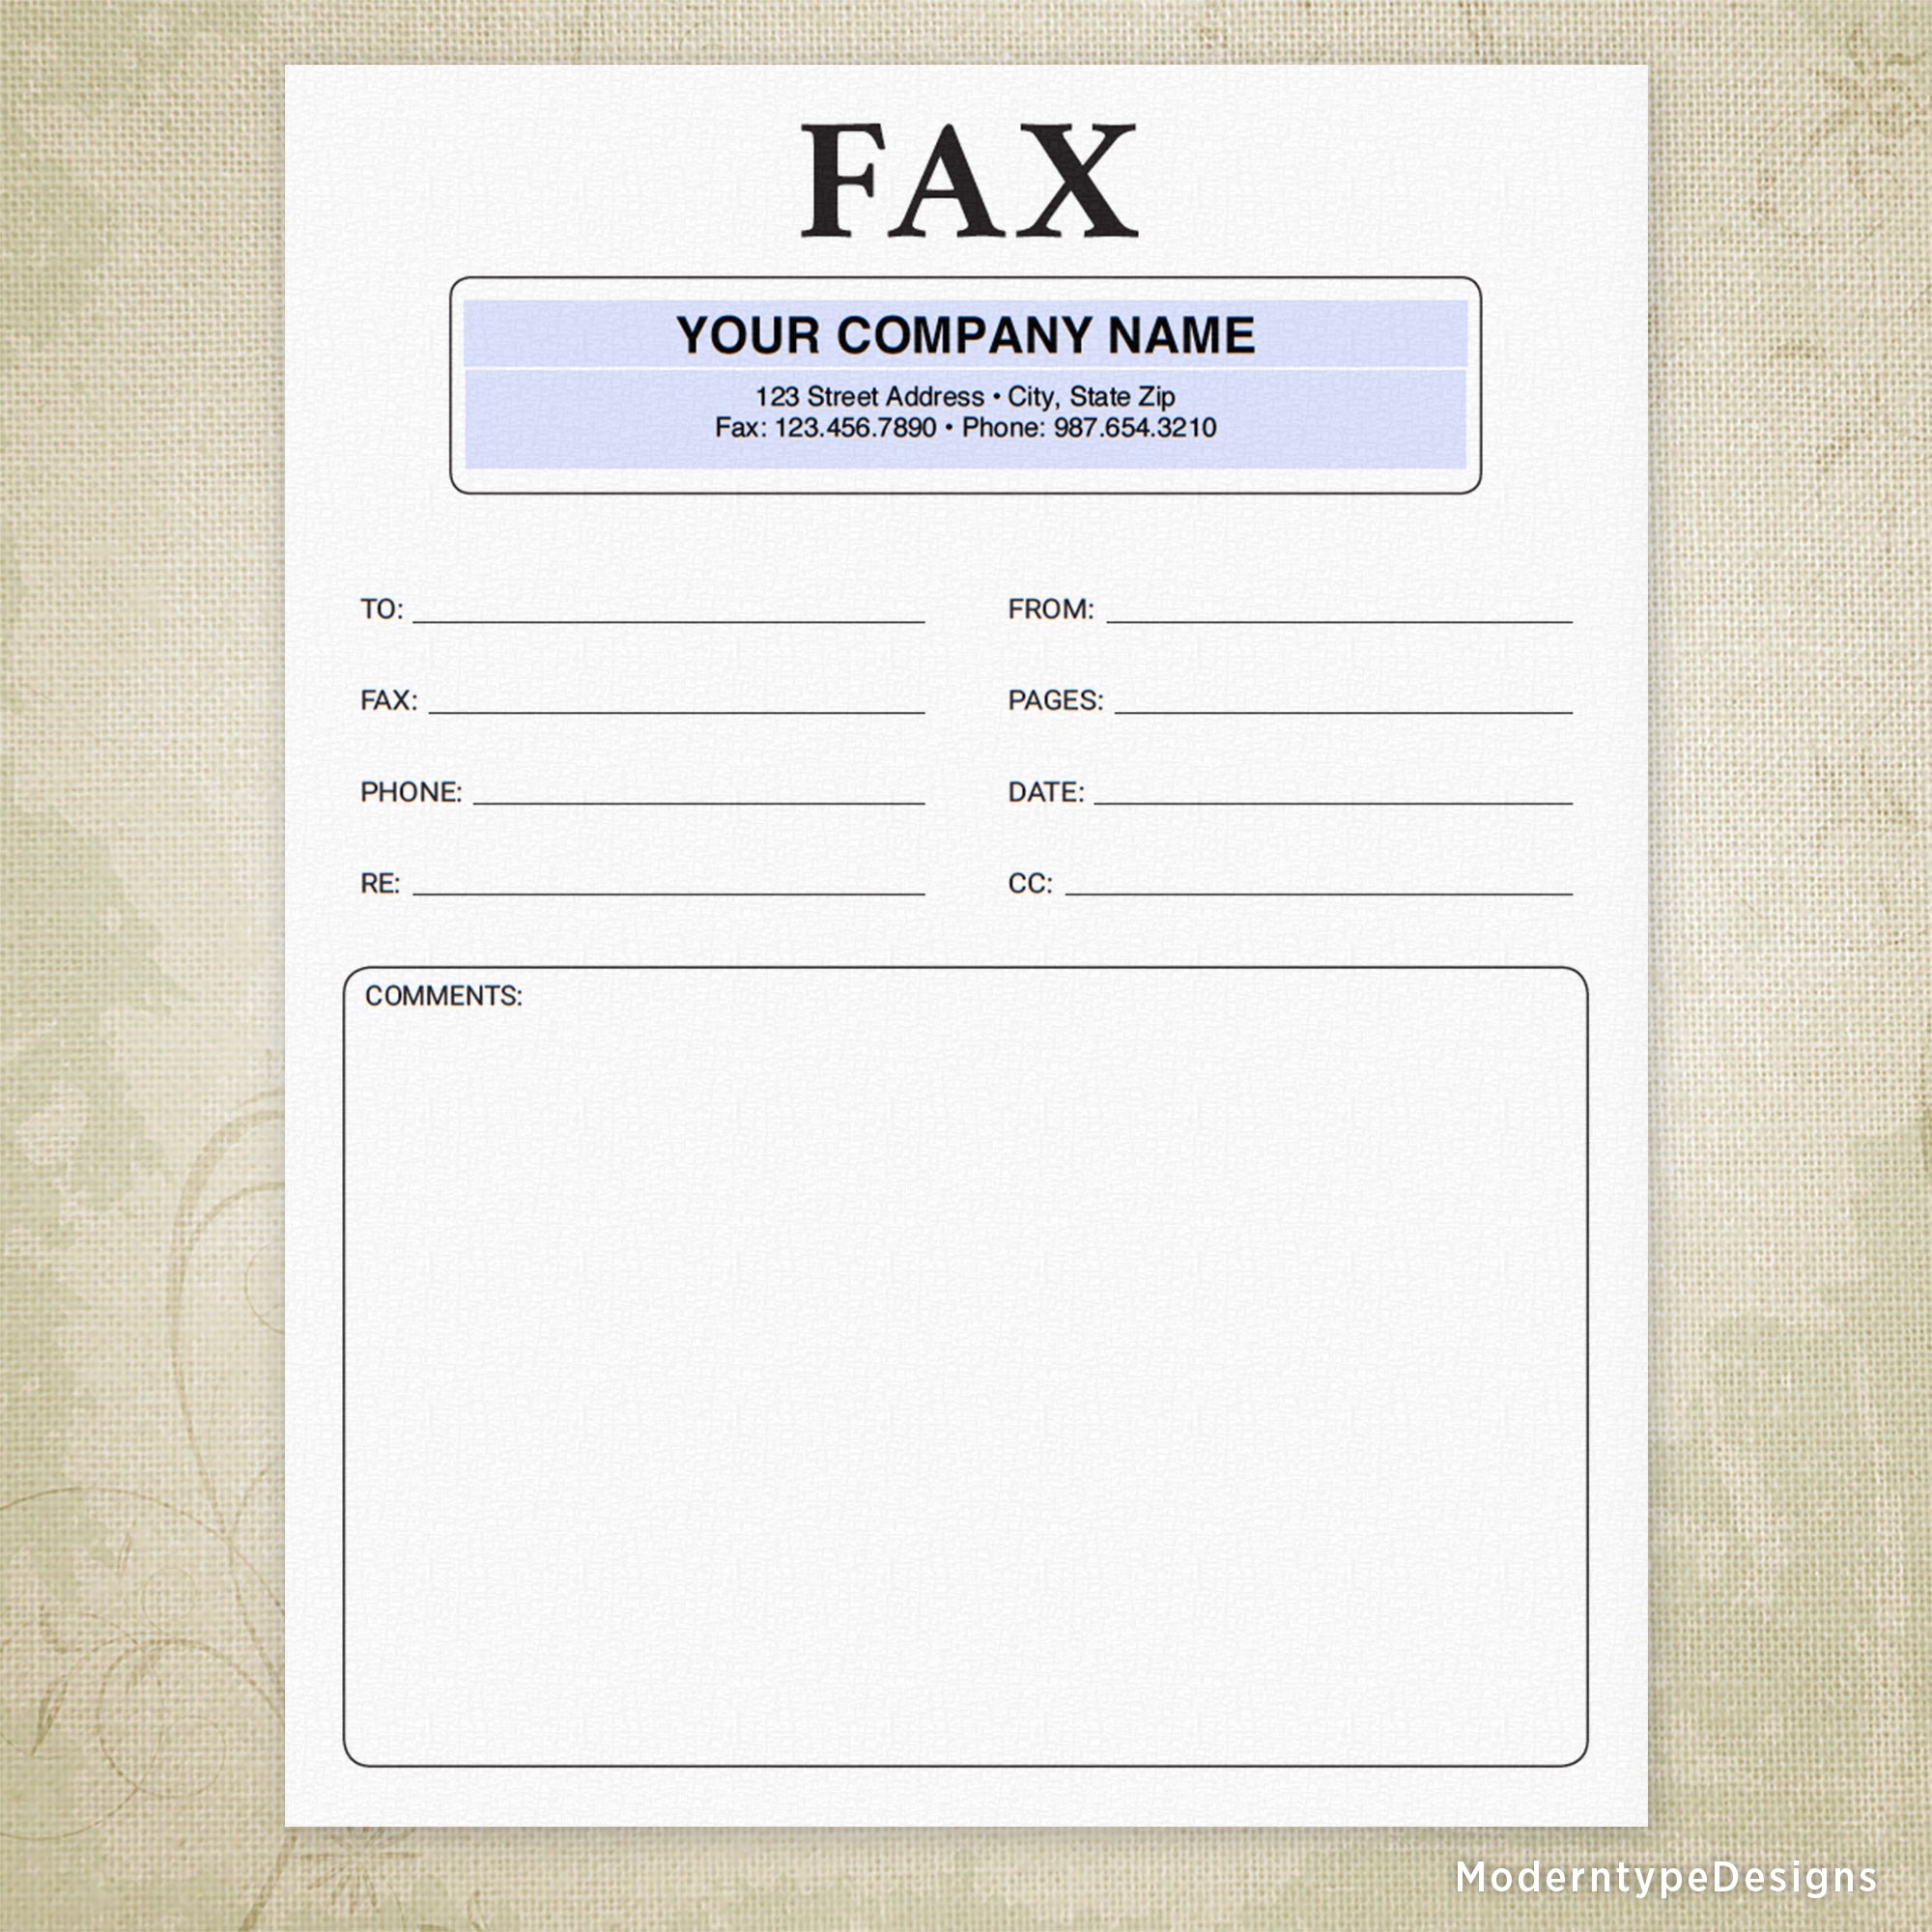 Fax Cover Sheet Printable Form, Personalized